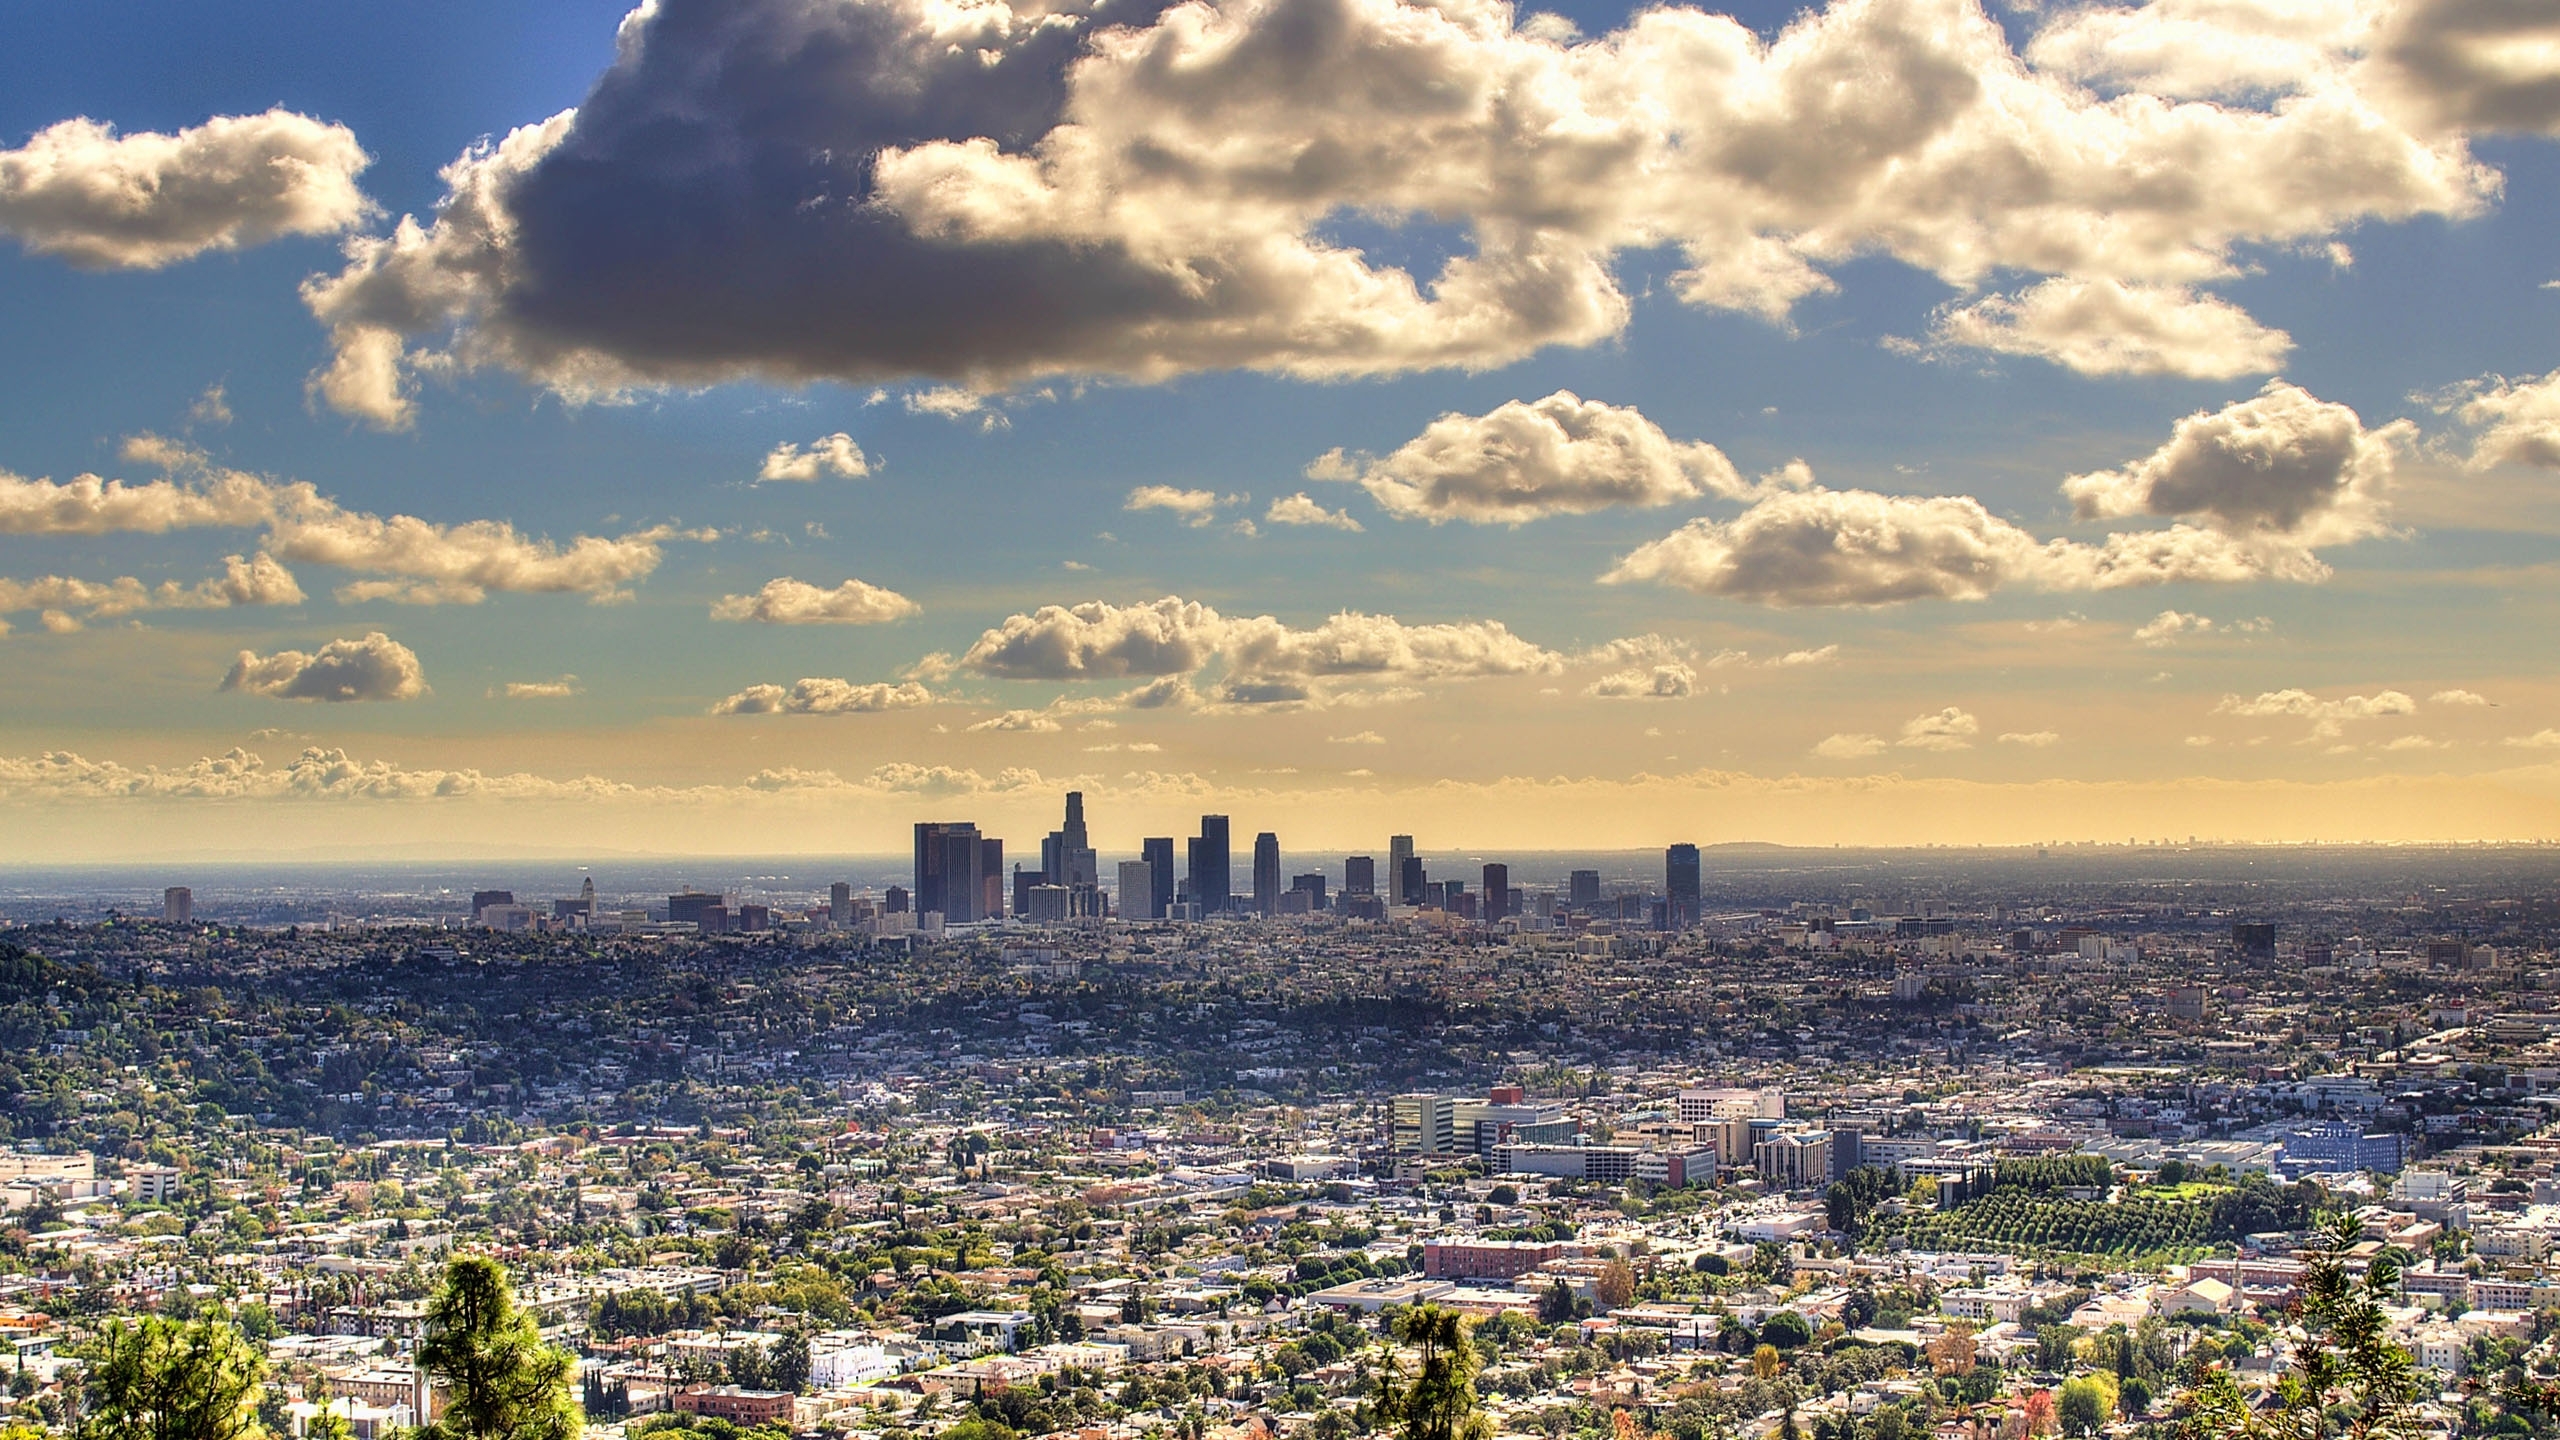 10 Top Hd Los Angeles Wallpaper FULL HD 1080p For PC Background